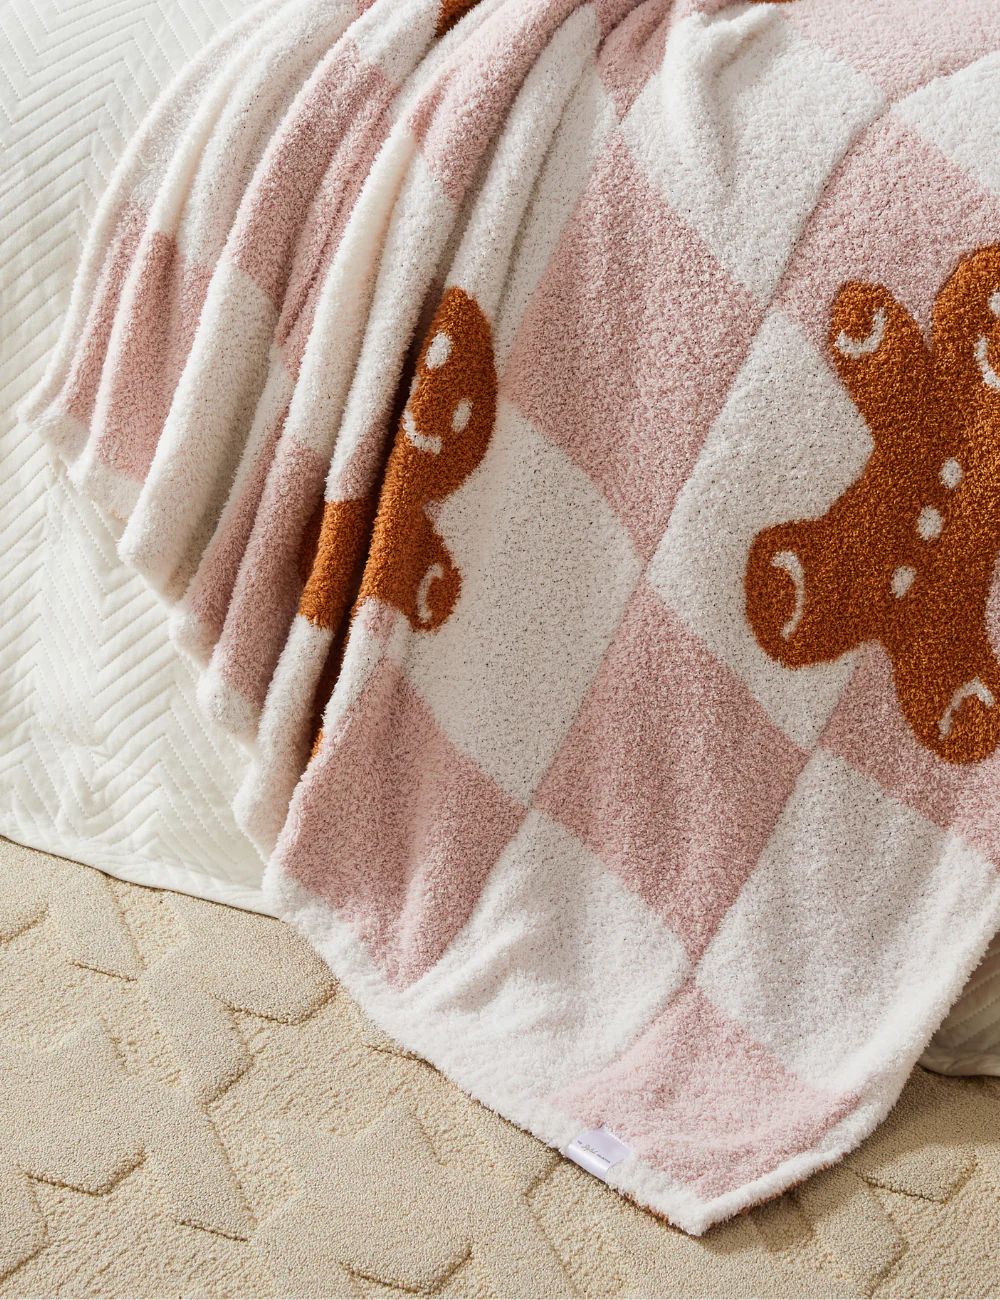 TSC x Madi Nelson: Gingerbread Checkered Buttery Blanket- Pre-Order 11-30 or sooner | The Styled Collection